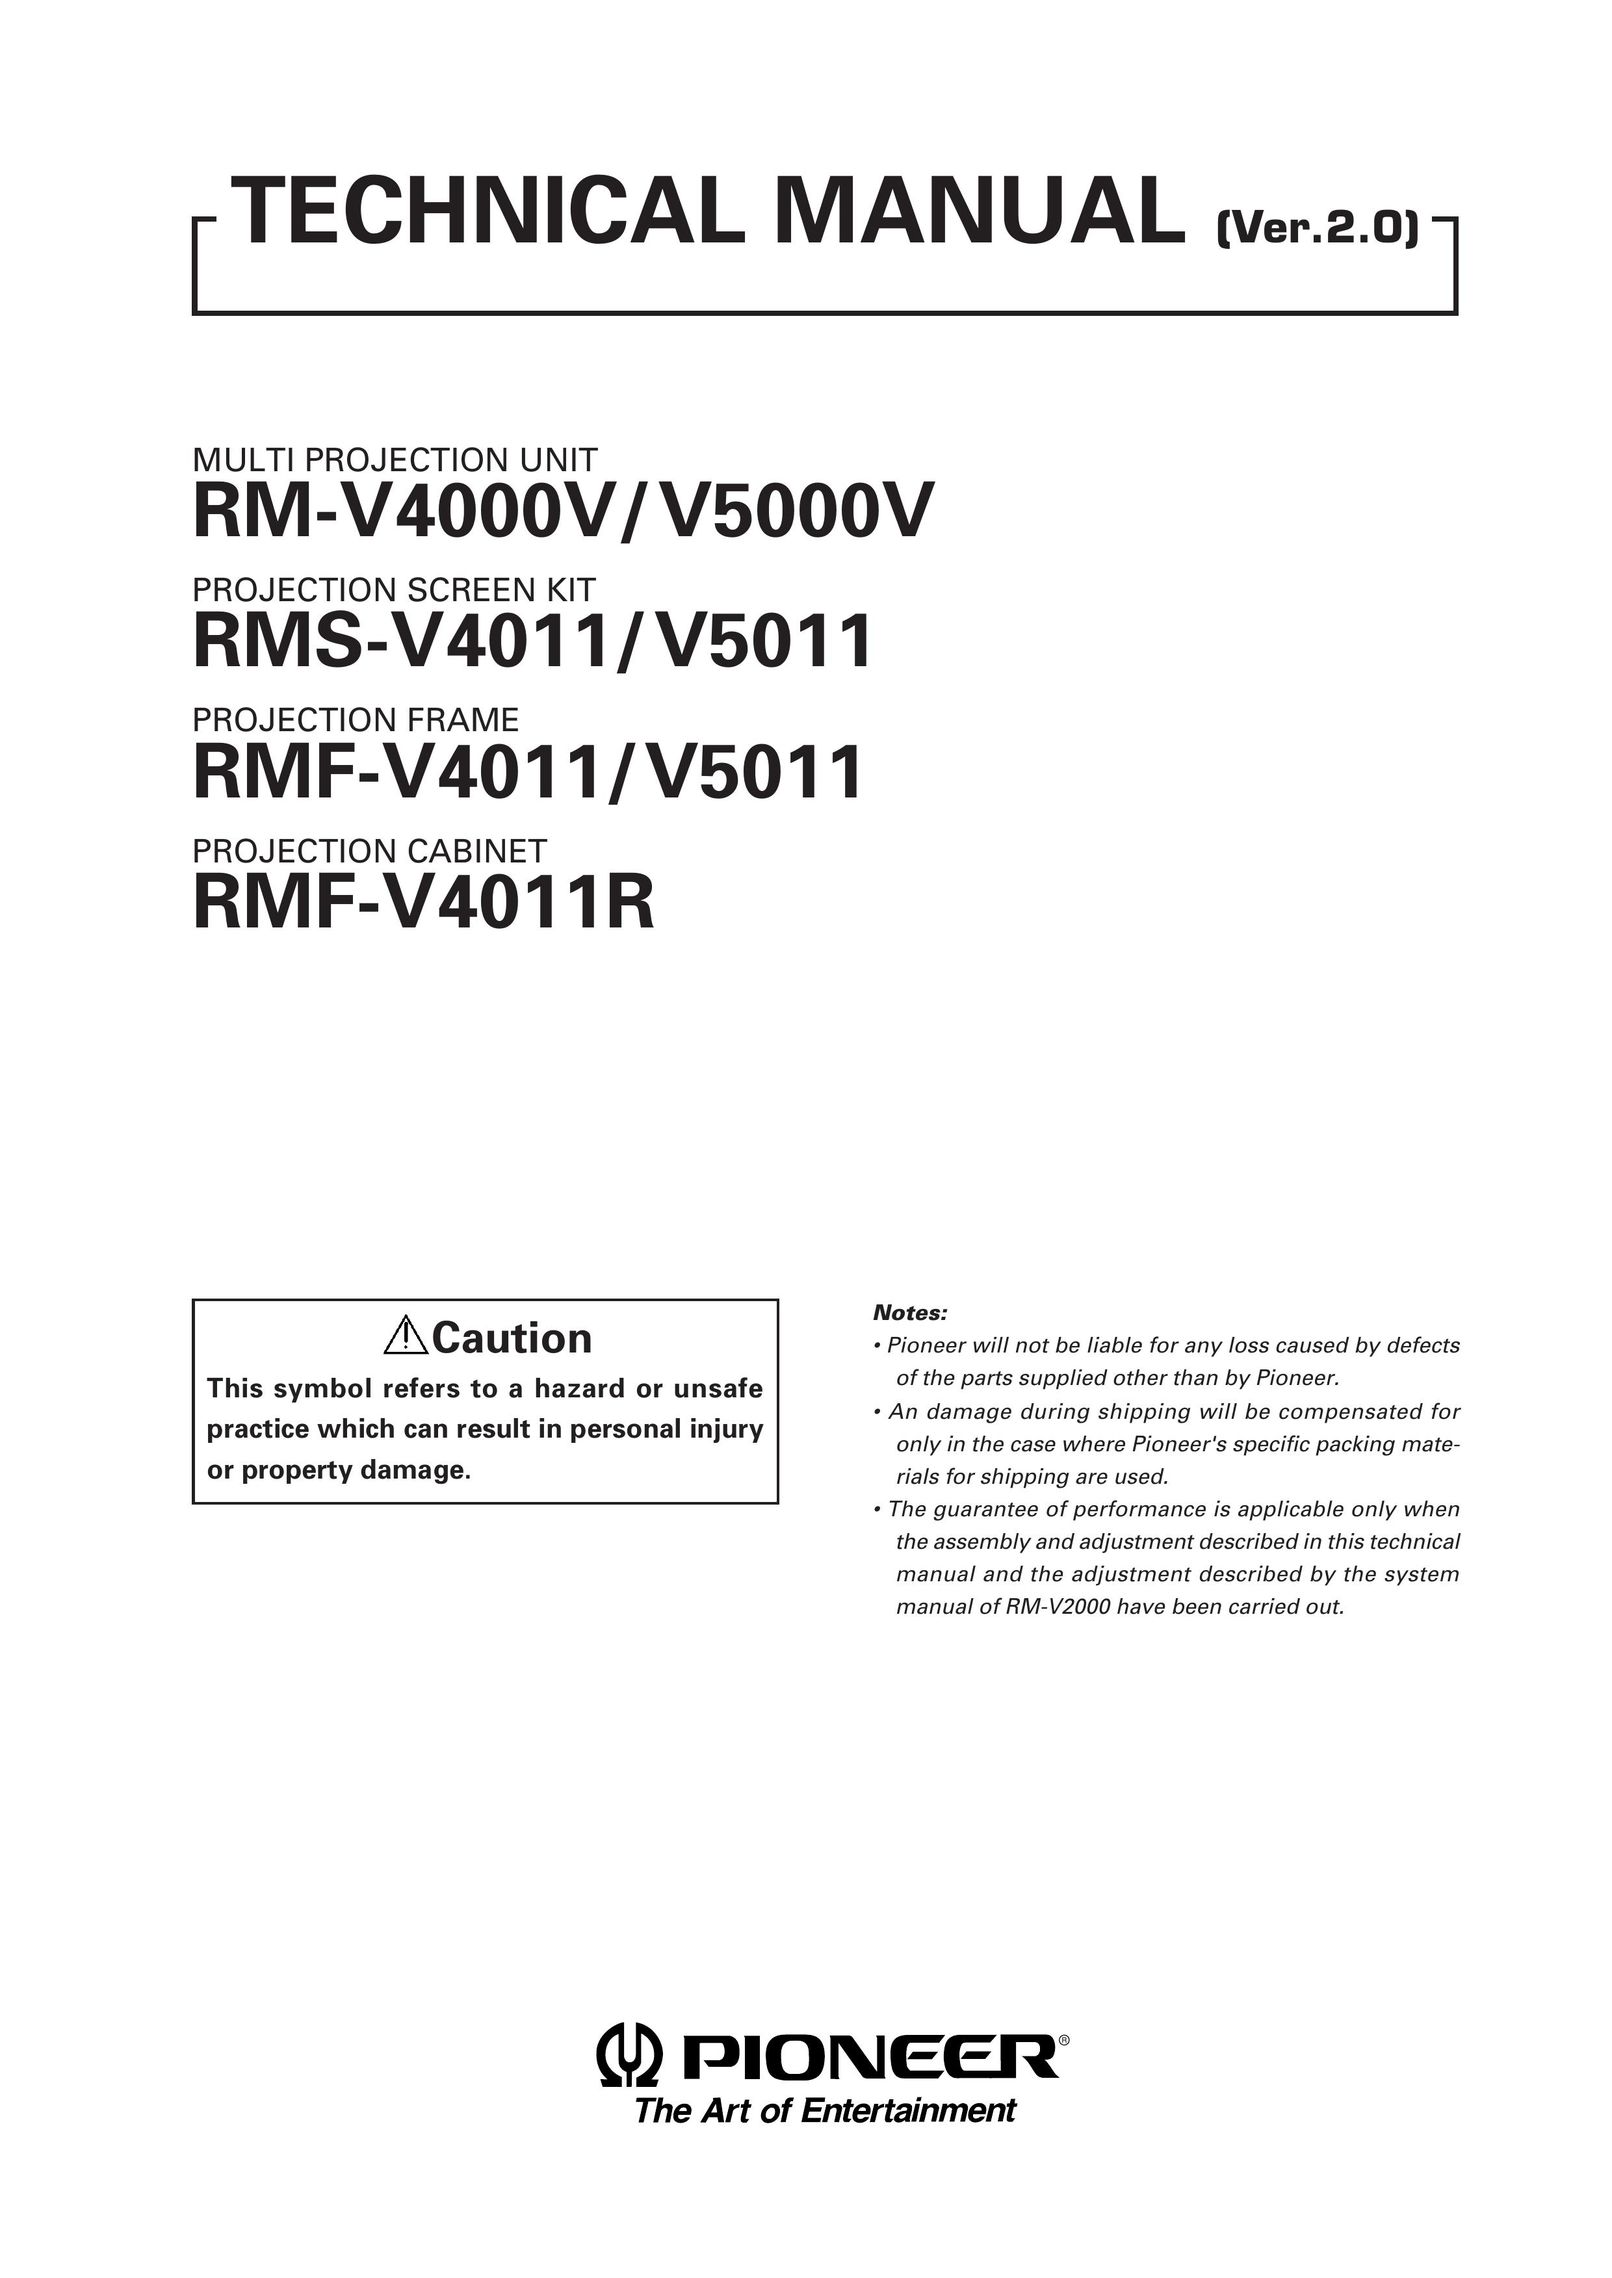 Pioneer RMF-V4011R Projector Accessories User Manual